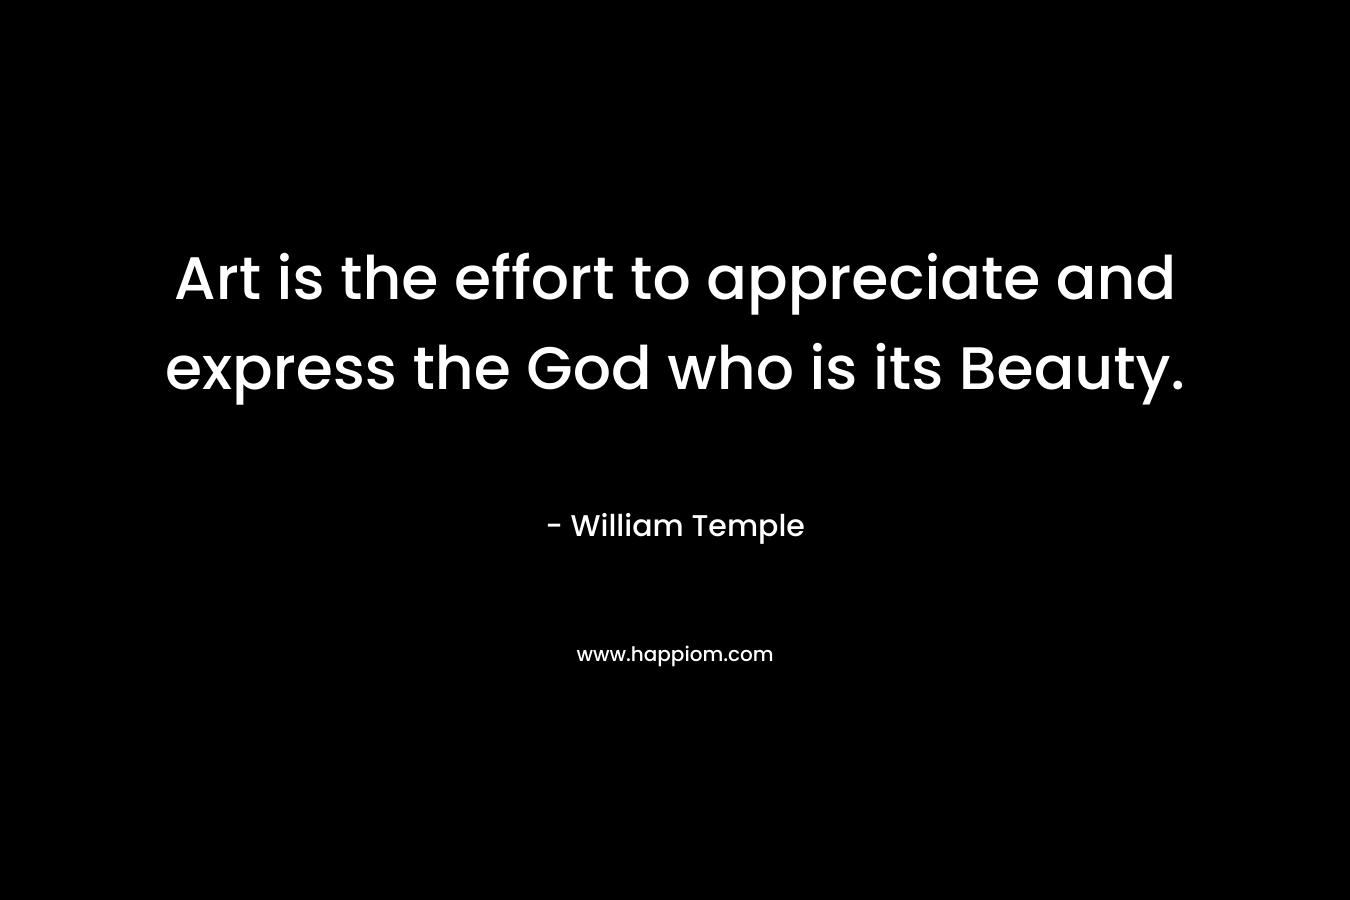 Art is the effort to appreciate and express the God who is its Beauty.